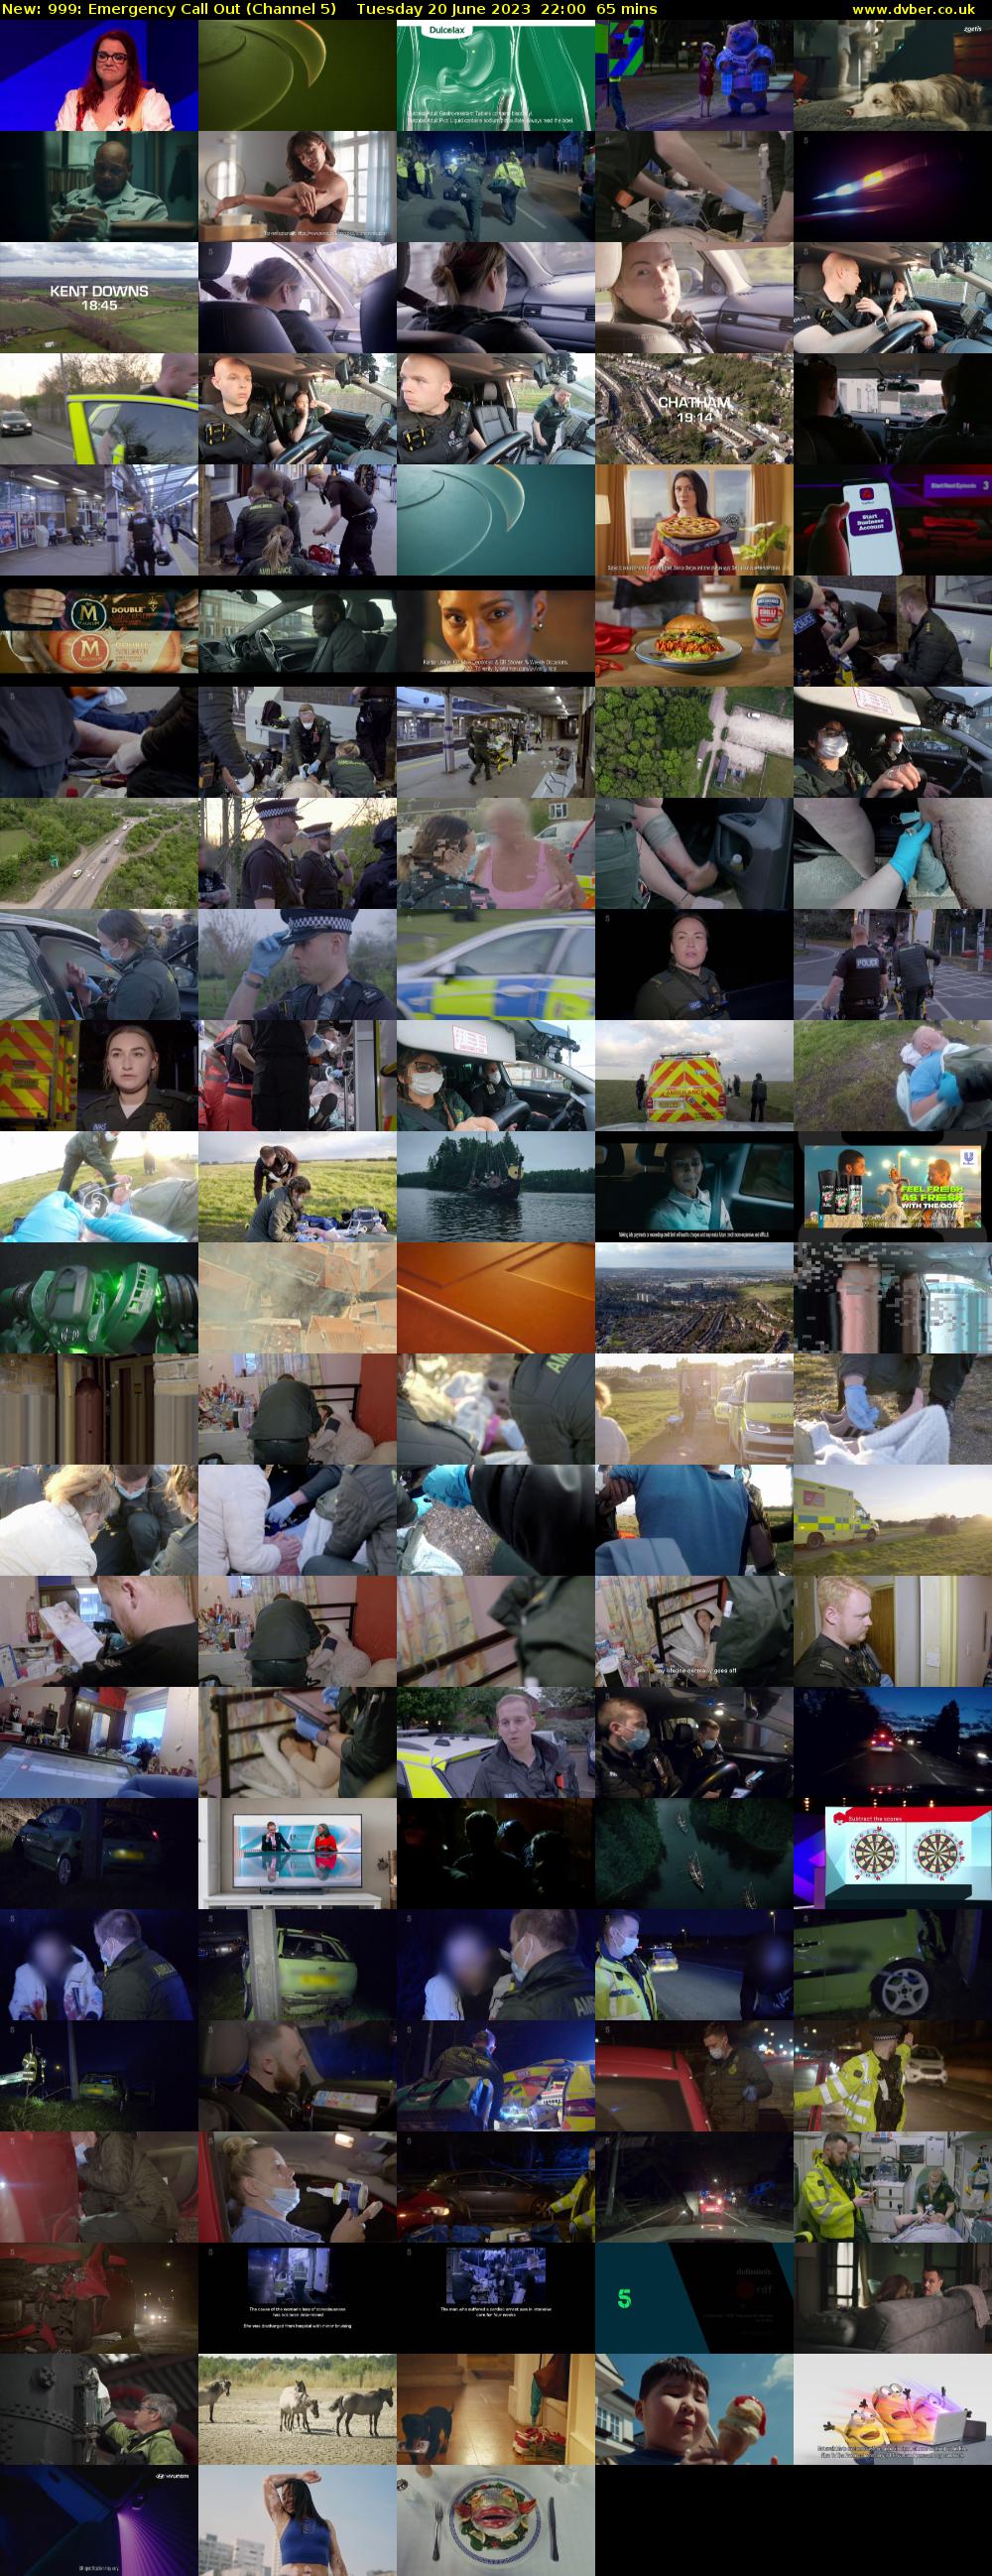 999: Emergency Call Out (Channel 5) Tuesday 20 June 2023 22:00 - 23:05